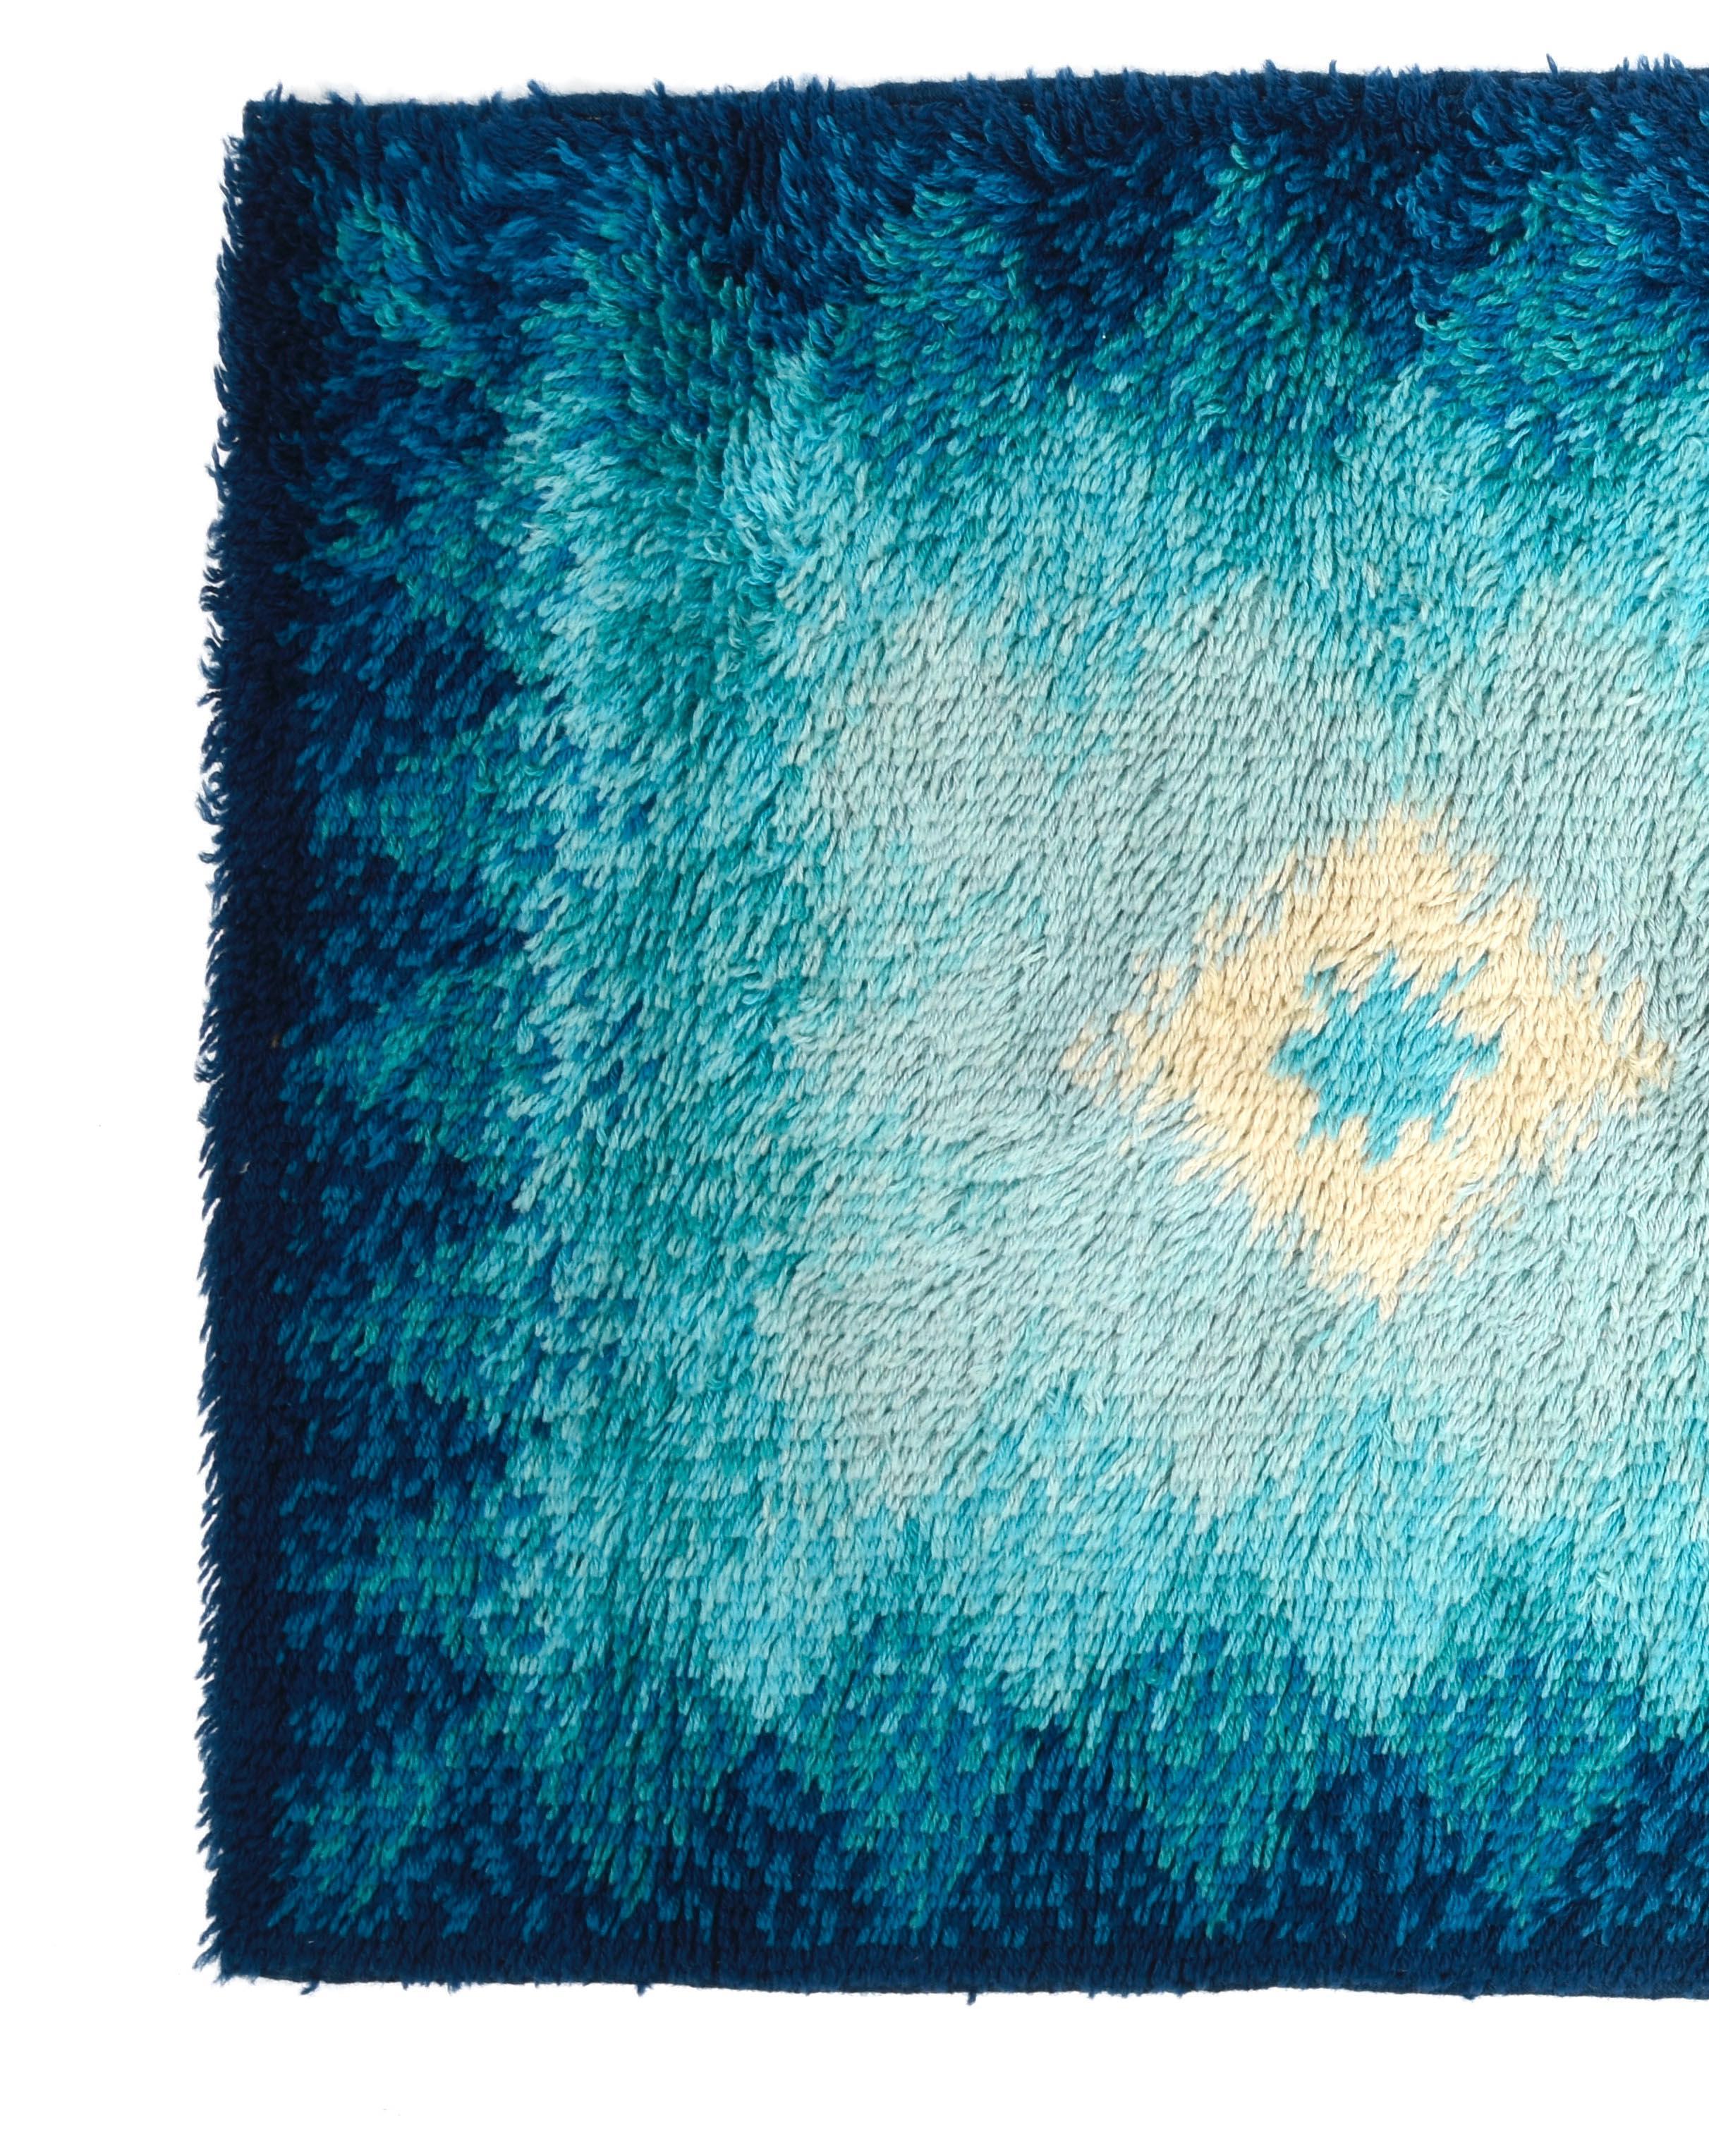 Amazing midcentury blue and white pure virgin wool carpet. This wonderful rug was produced by Samit Borgosesia in Italy during the 1970s.

This item is entirely made of the purest New Zeland virgin wool with blue, light blue and white geometric